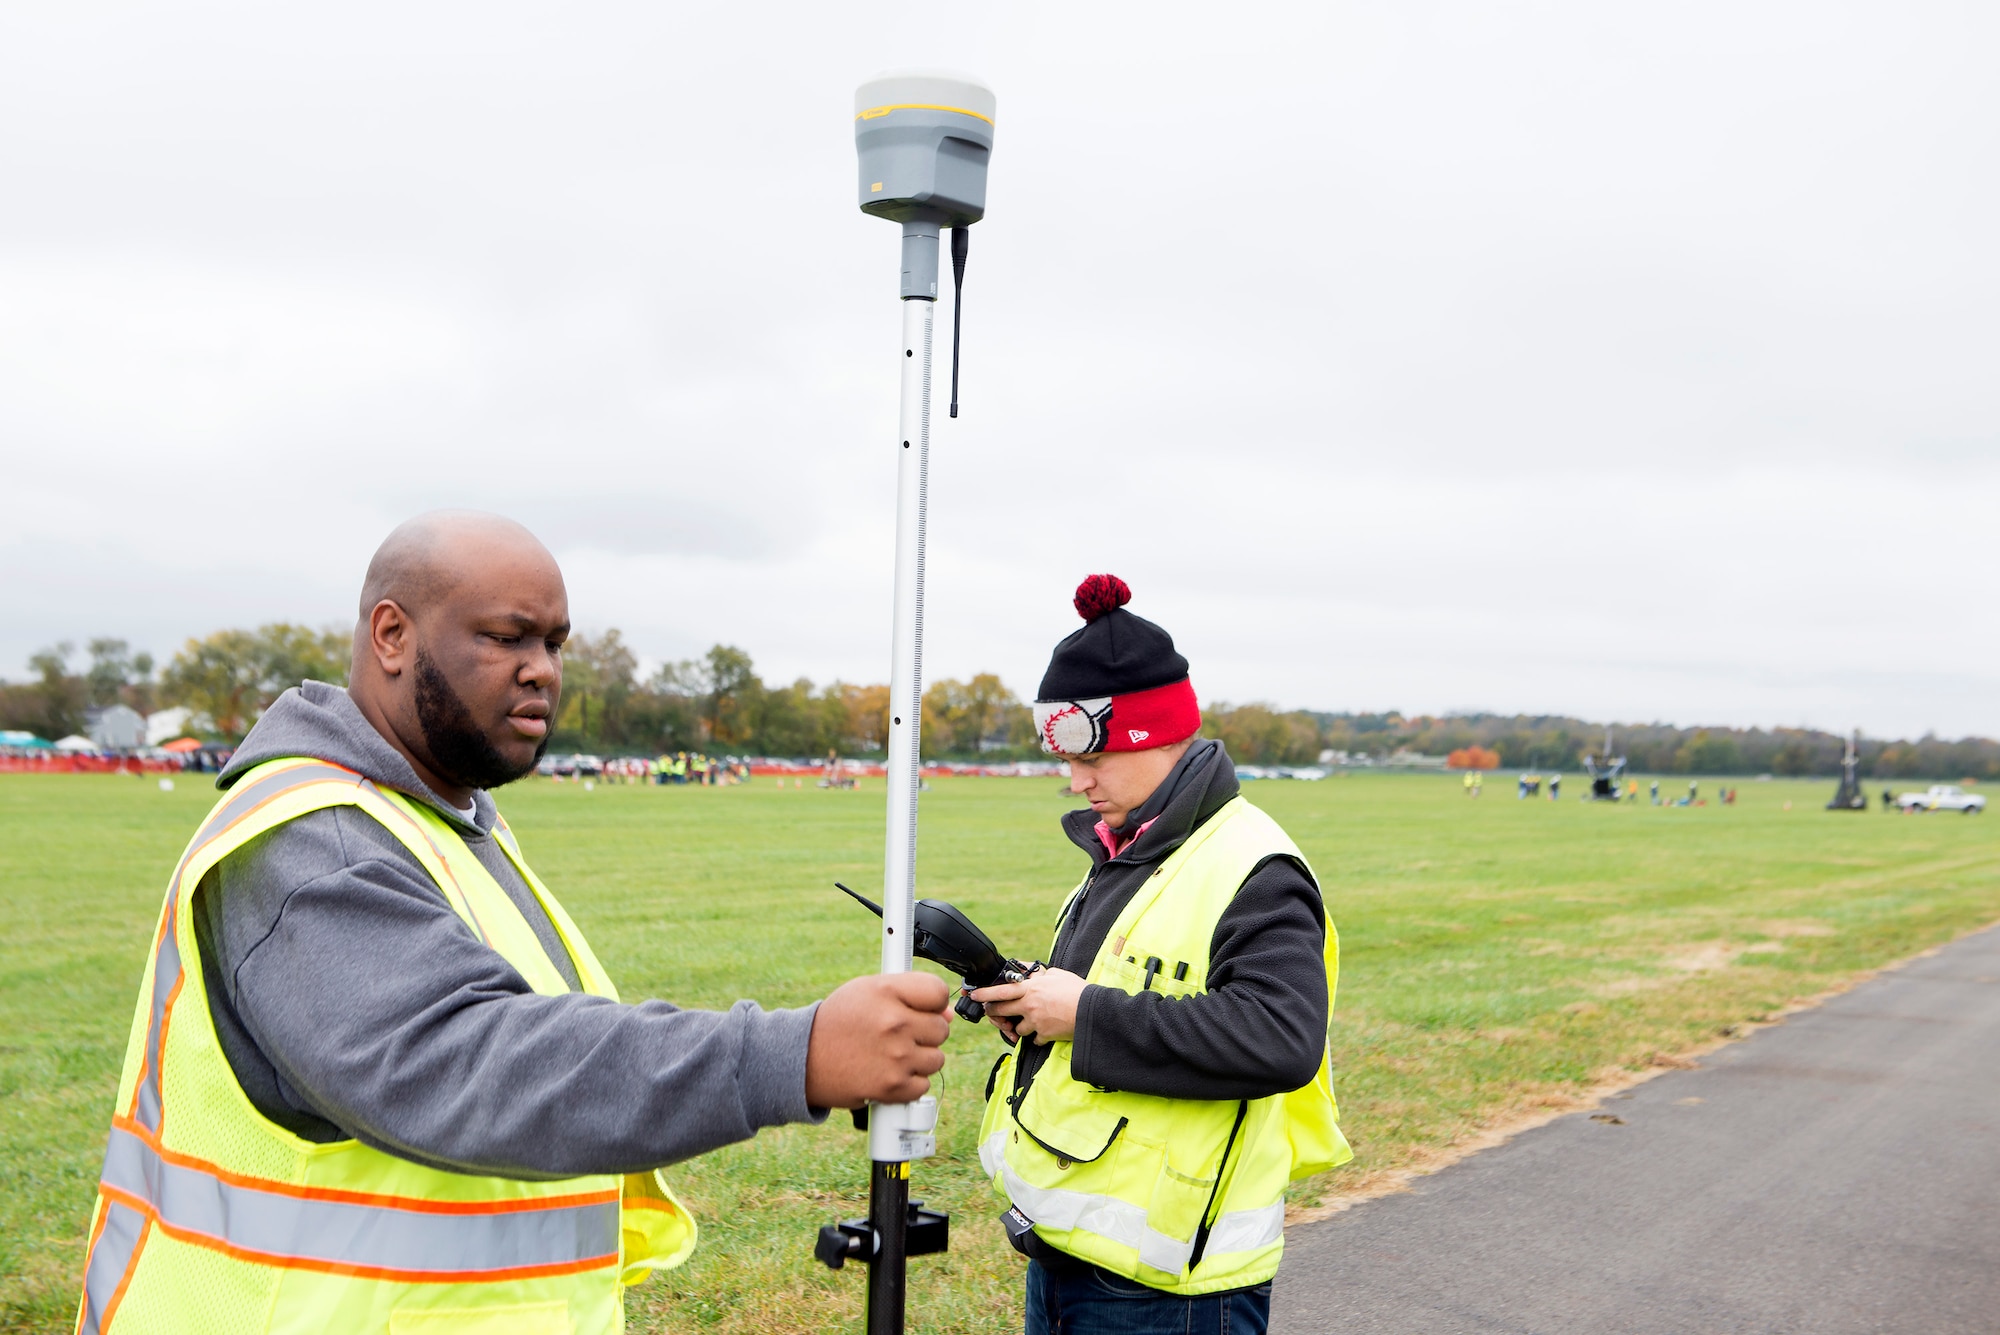 Staff members use GPS surveying equipment to measure the distance a pumpkin was chucked during the 14th annual Wright-Patterson Air Force Base, Ohio, pumpkin chuck Nov. 2.